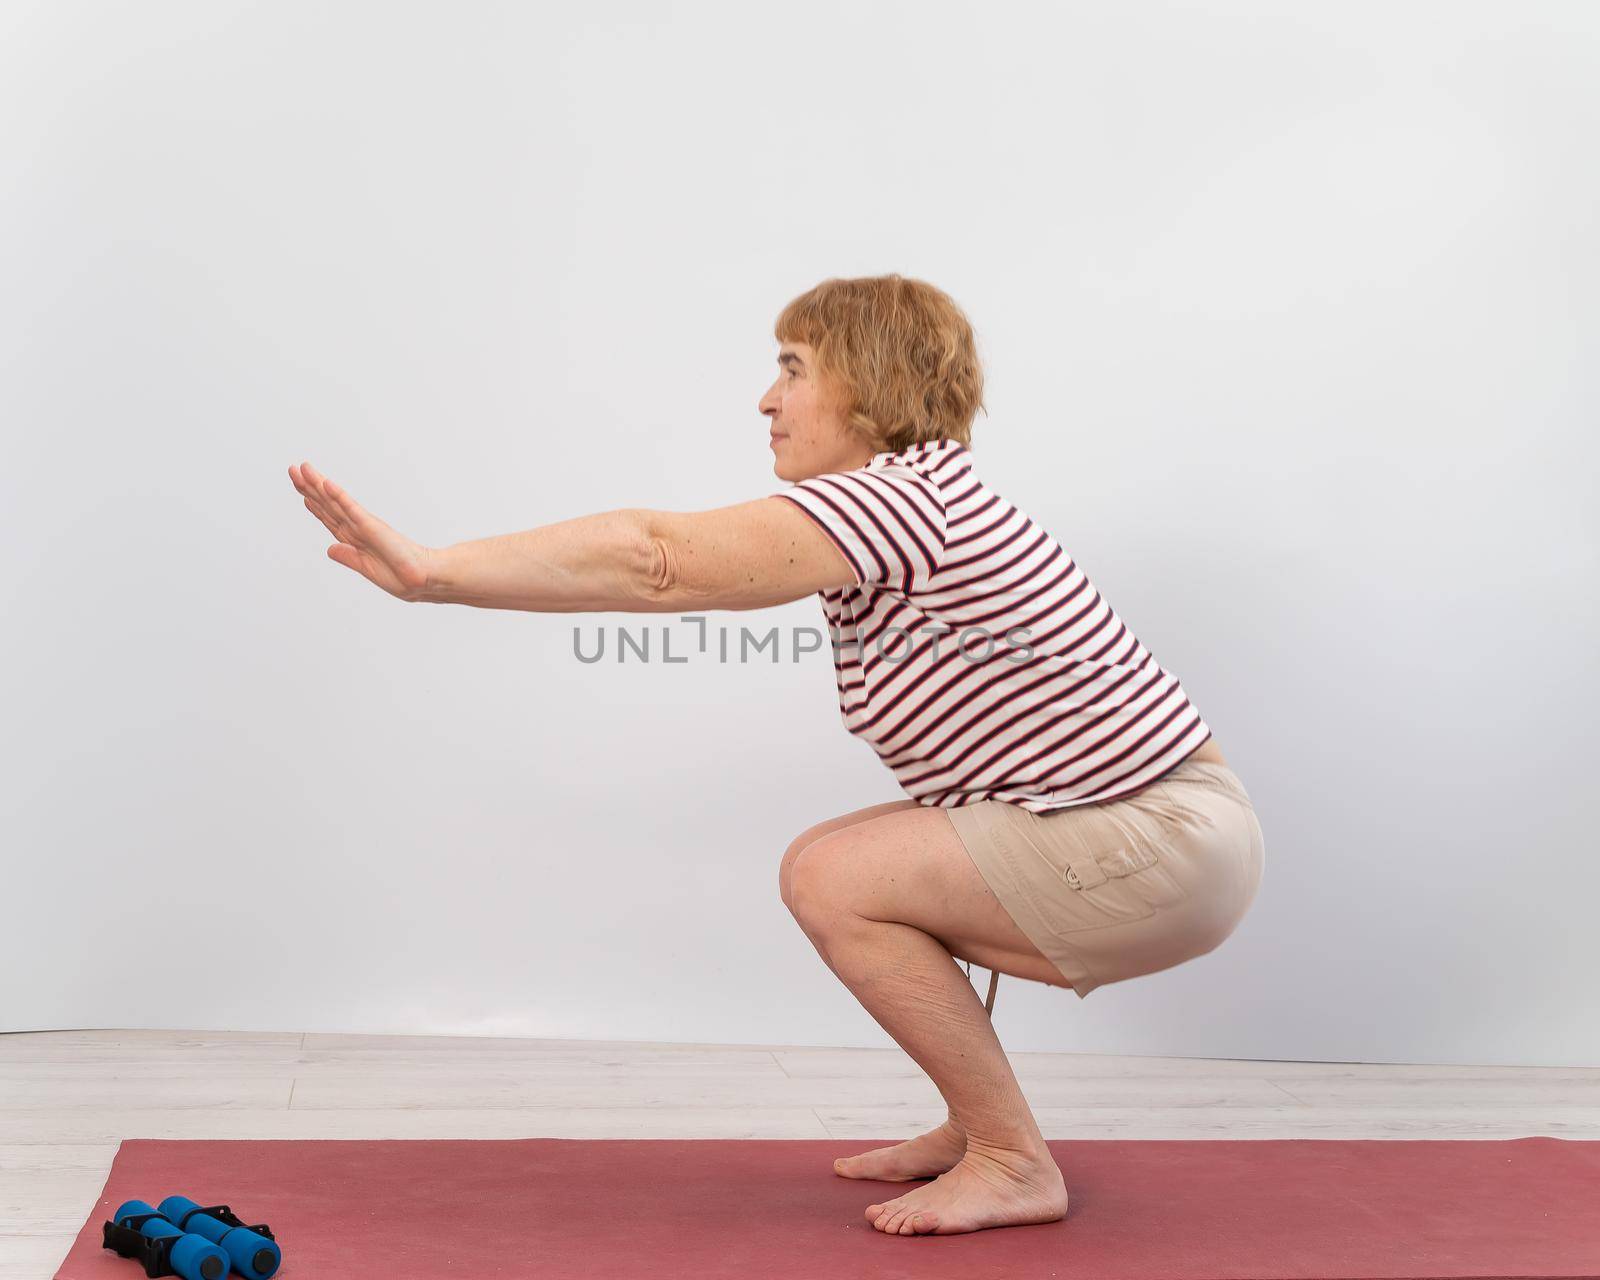 Elderly woman doing squats on a white background. The old lady is doing exercises for her health.